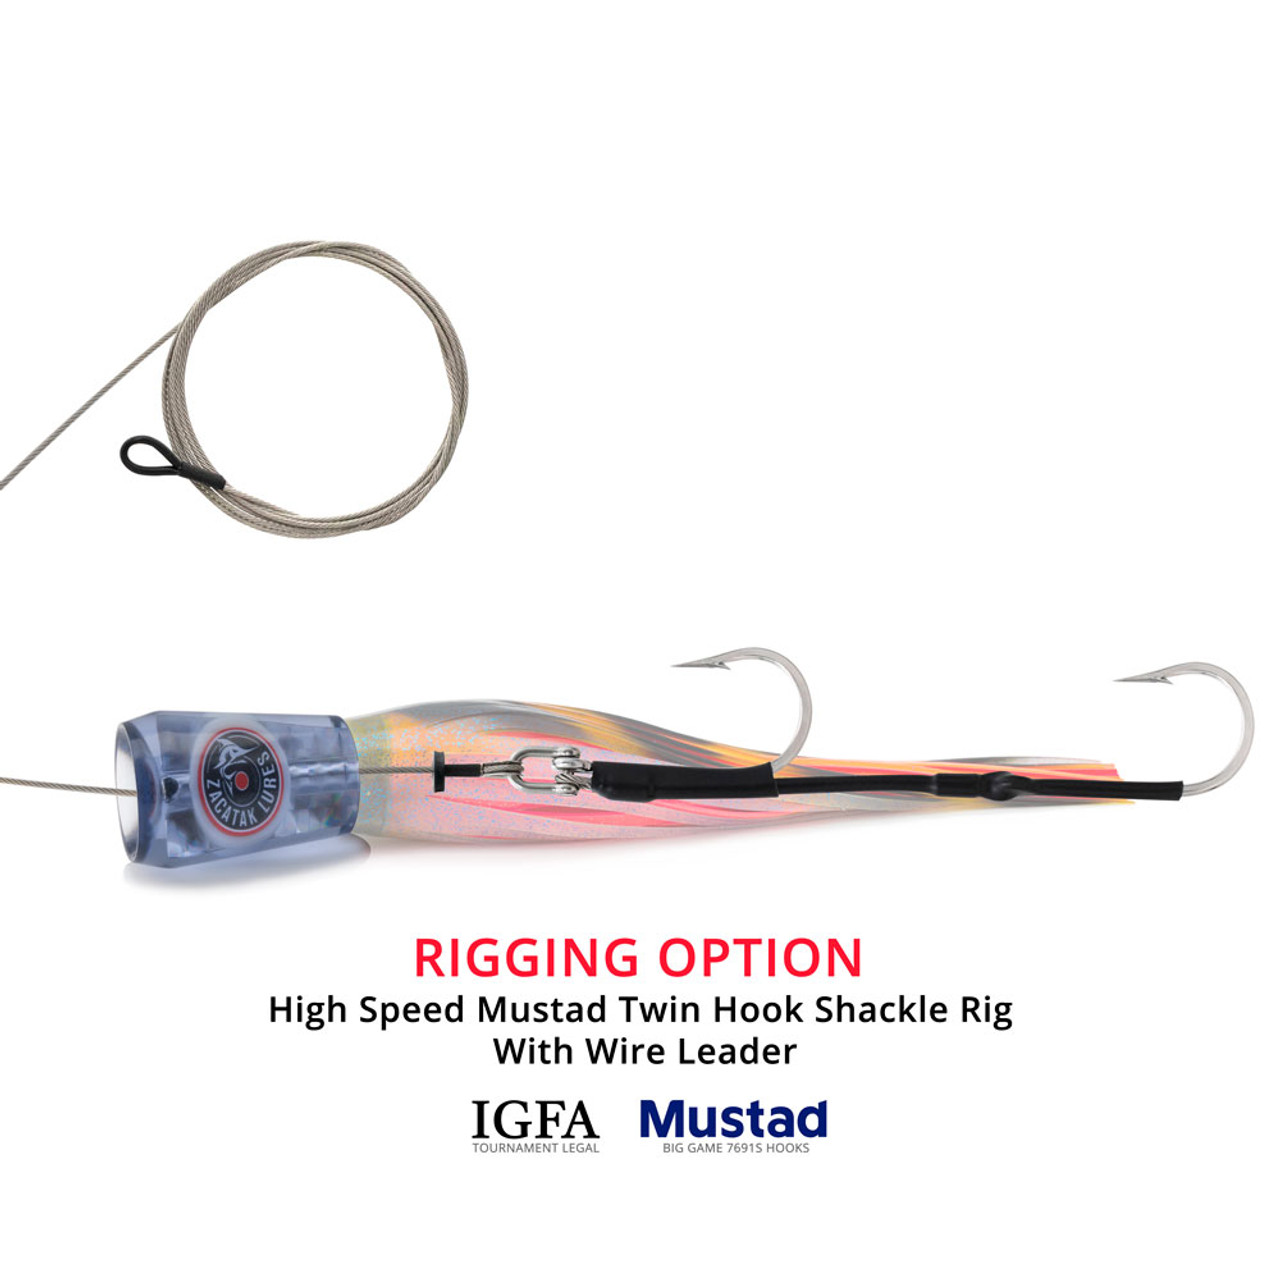 https://cdn11.bigcommerce.com/s-sv4r4mic/images/stencil/1280x1280/products/9366/50907/zacatak-lures-high-speed-rigging-option-twin-hook-shackle-rig-vamp__82288.1671434180.jpg?c=2?imbypass=on